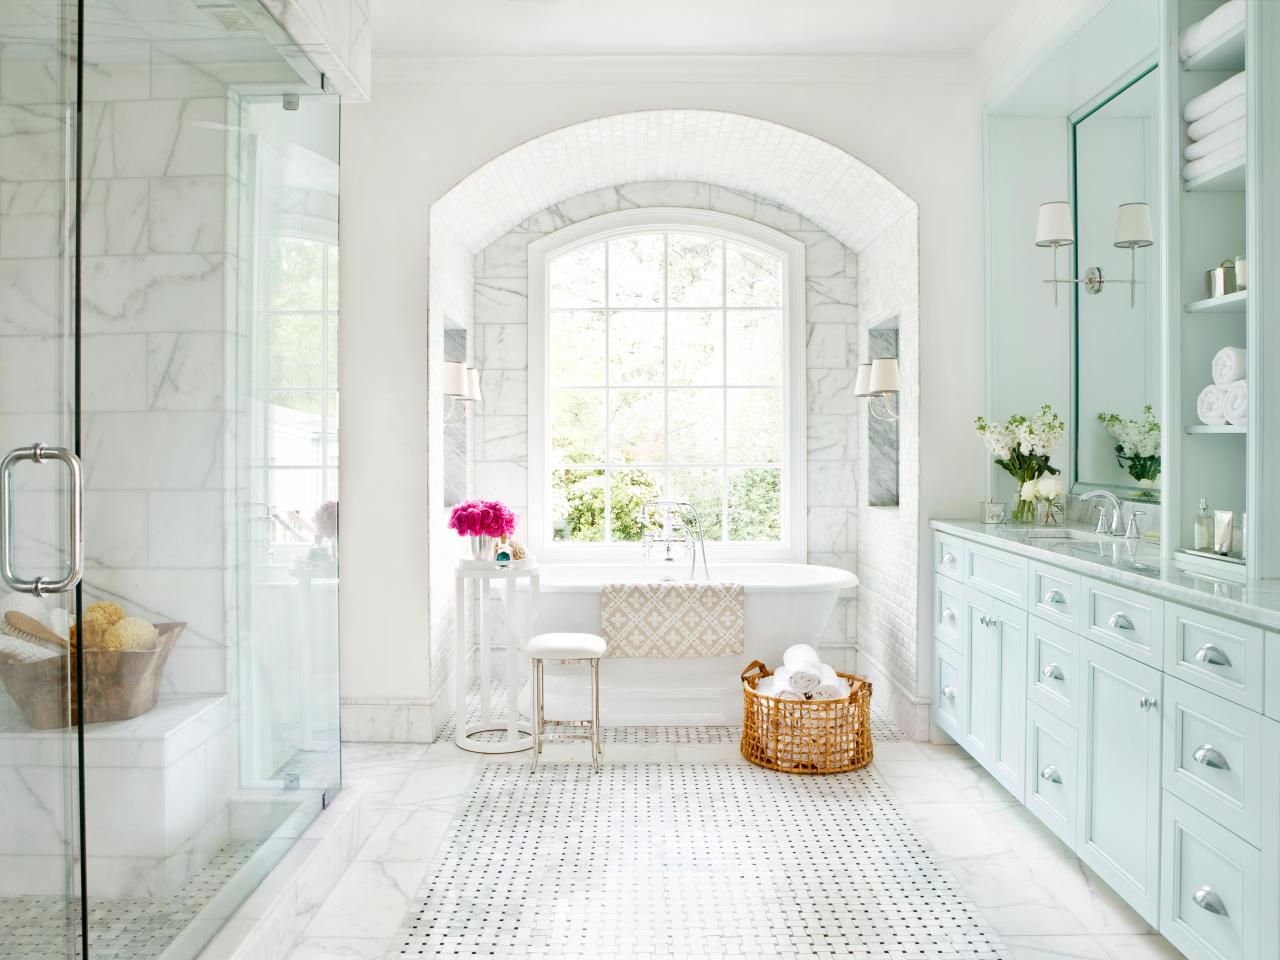 Key Elements for a Spa-Inspired Bathroom